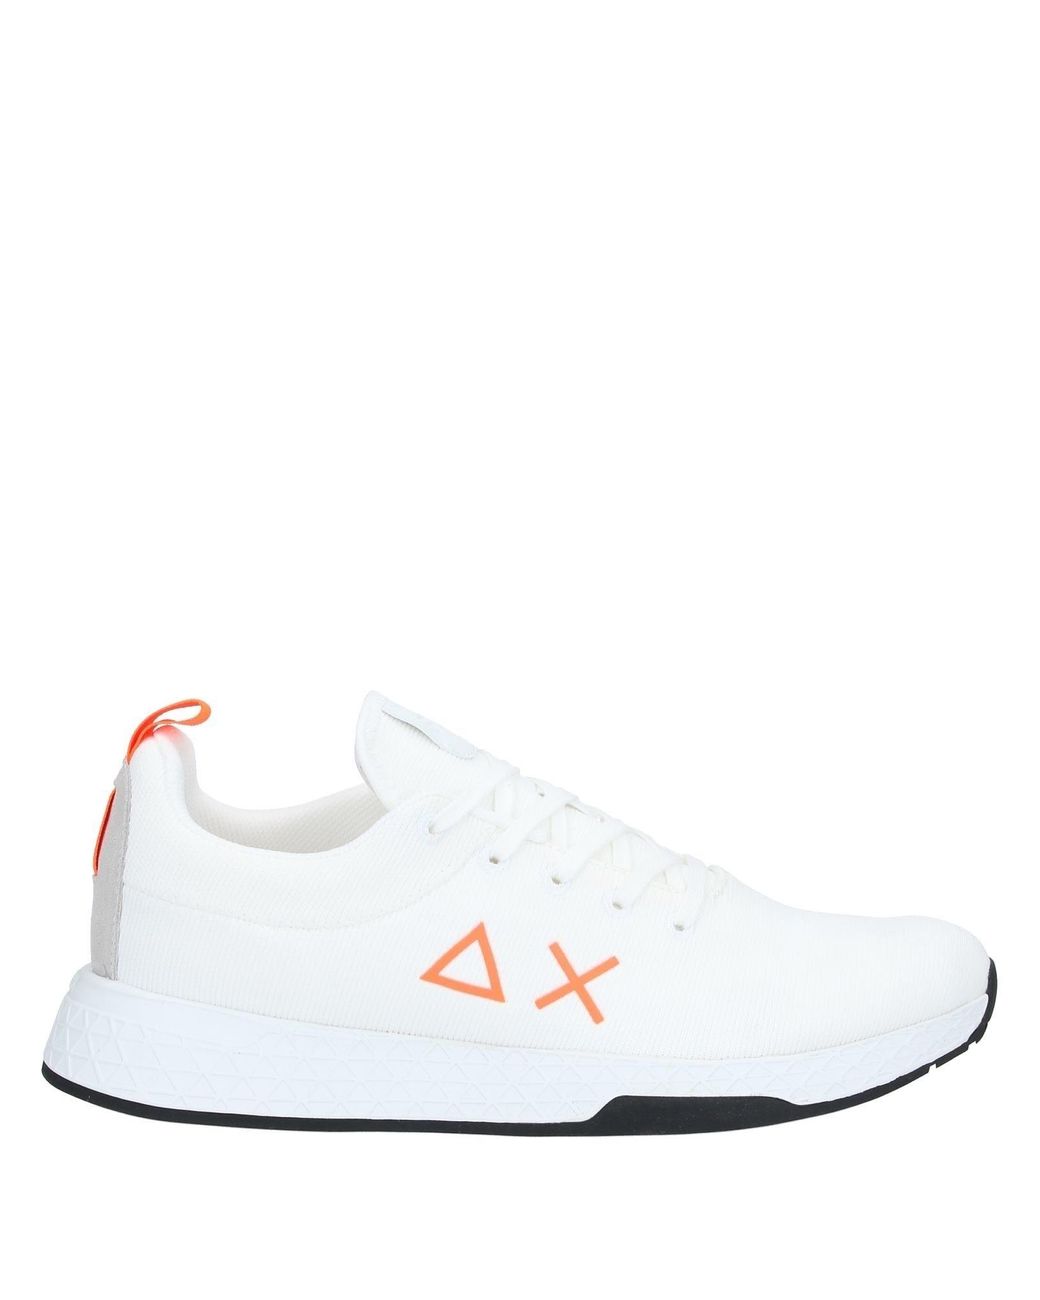 Sun 68 Suede Low-tops & Sneakers in White for Men - Lyst